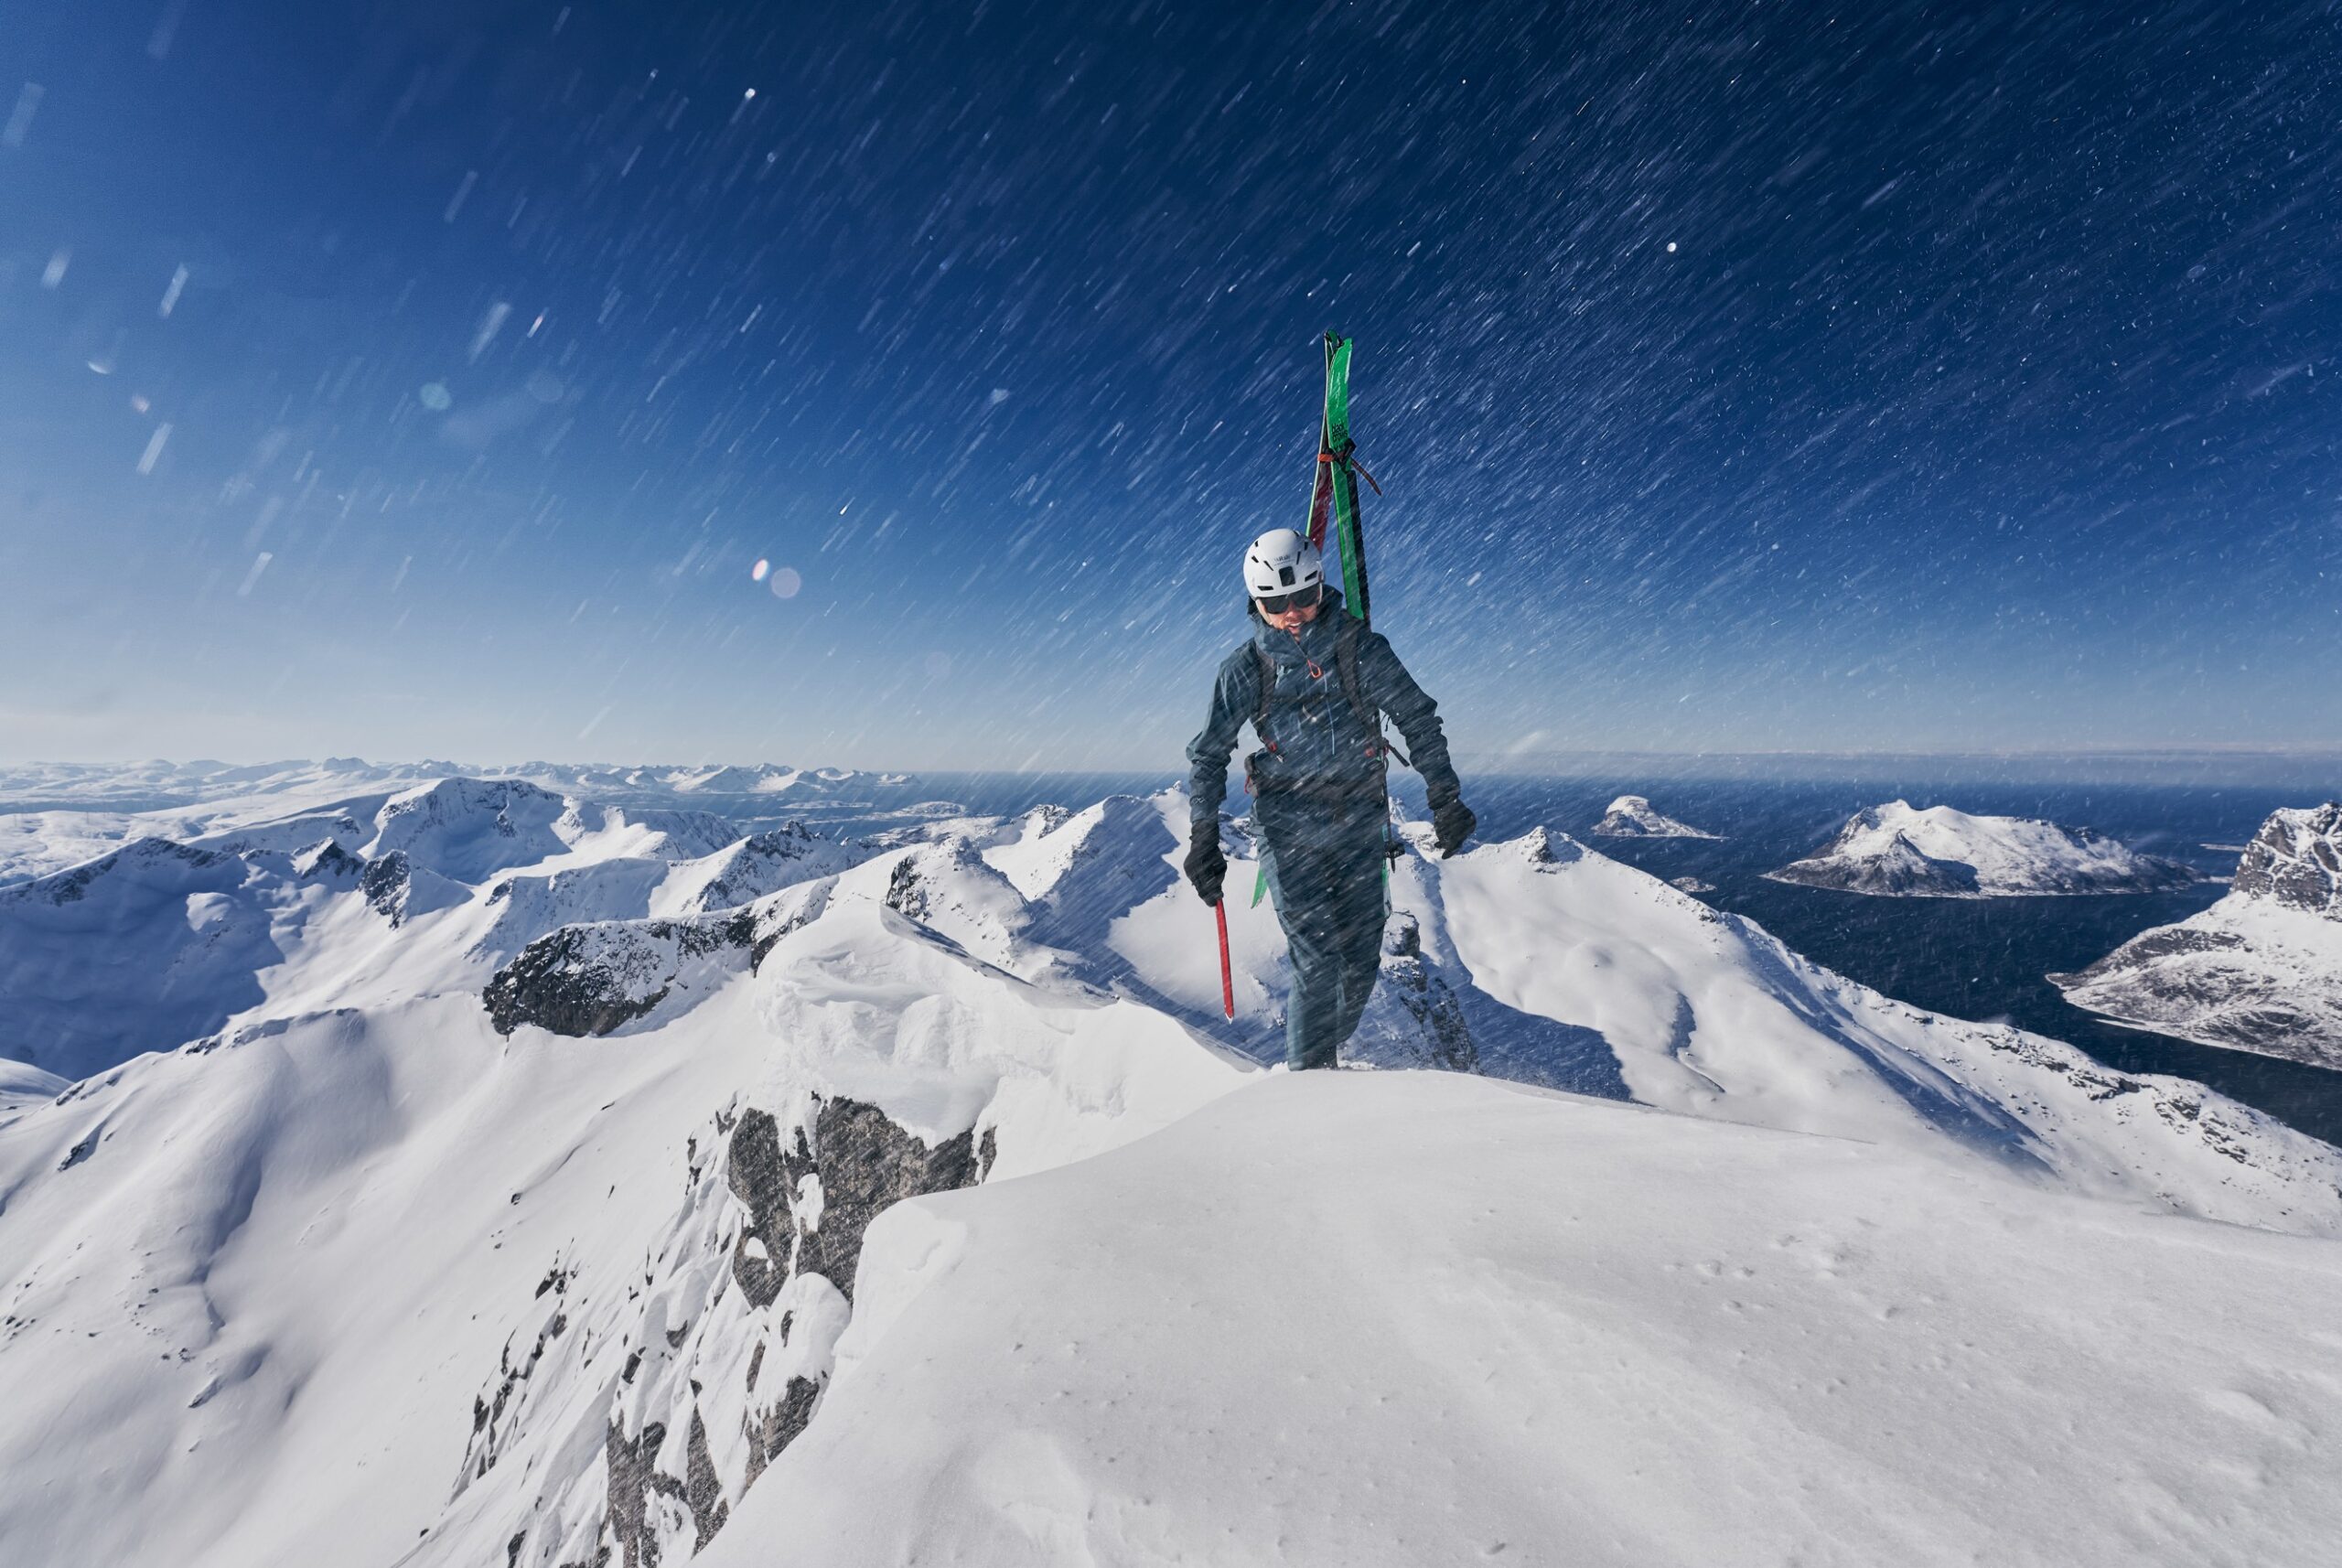 man geared up with skis straped to back reaches summit of mountain on foot. looks like norway with sea and mountains rising out of water, with small mountain islands. snow is coming down out of a blue sky